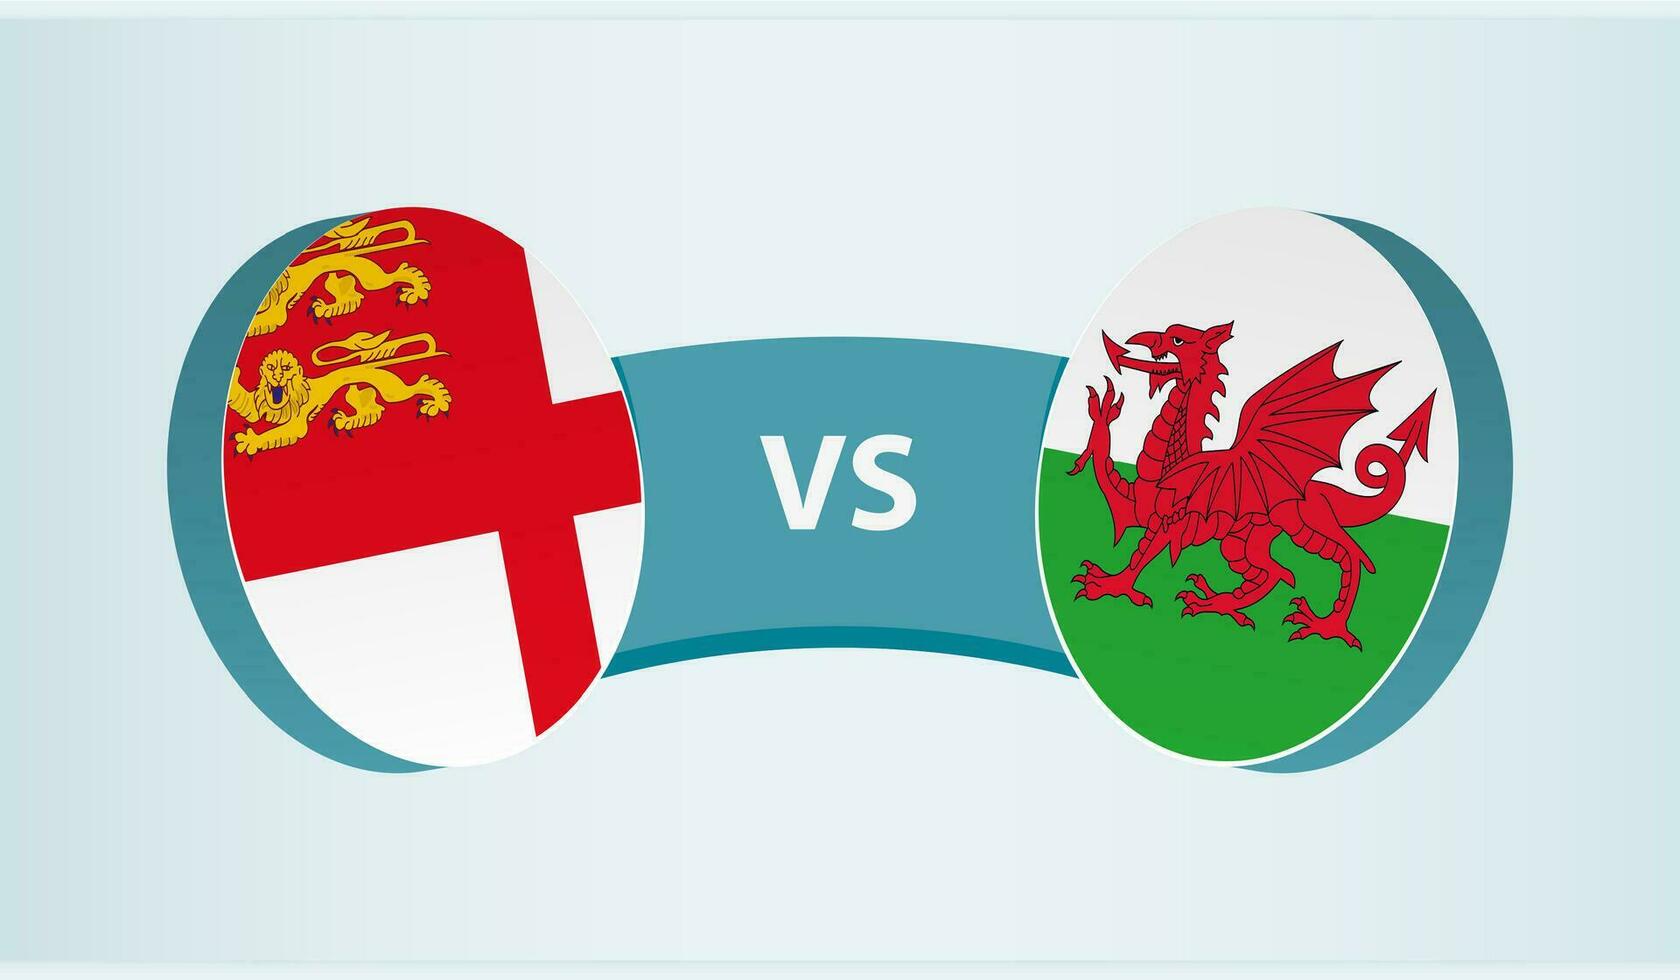 Sark versus Wales, team sports competition concept. vector